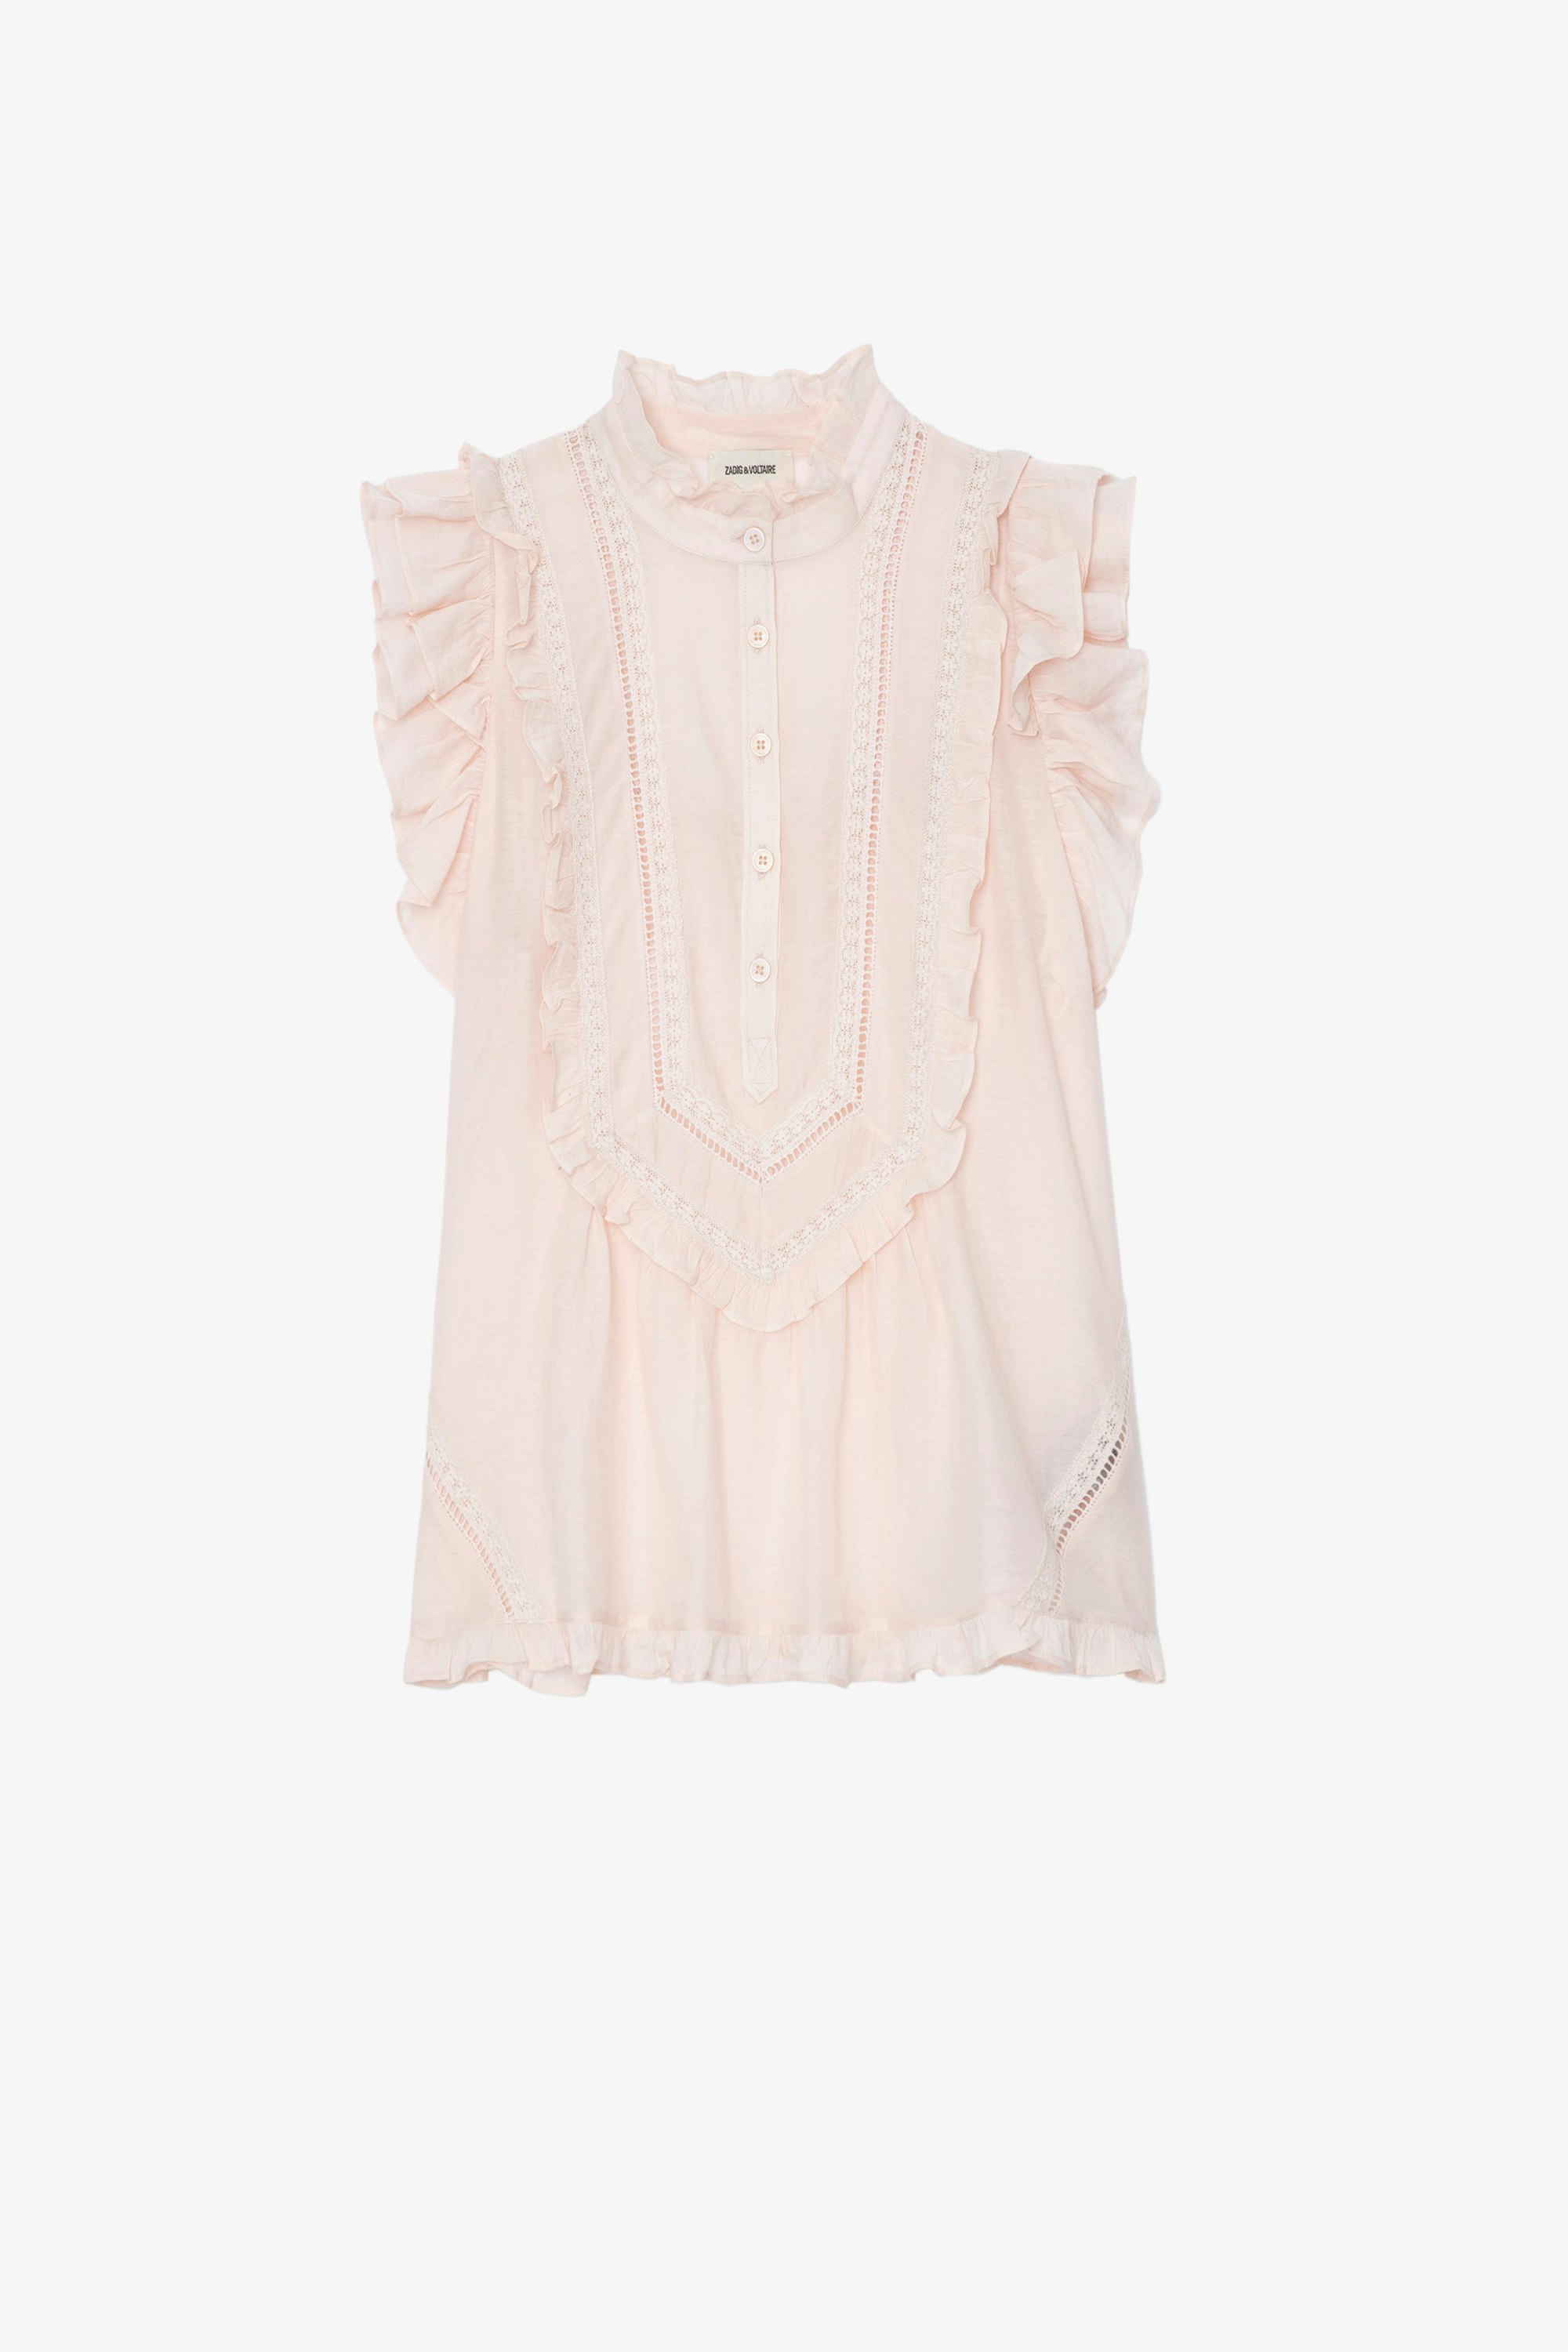 Tama Top Women's light pink short-sleeved top with ruffles and lace strips